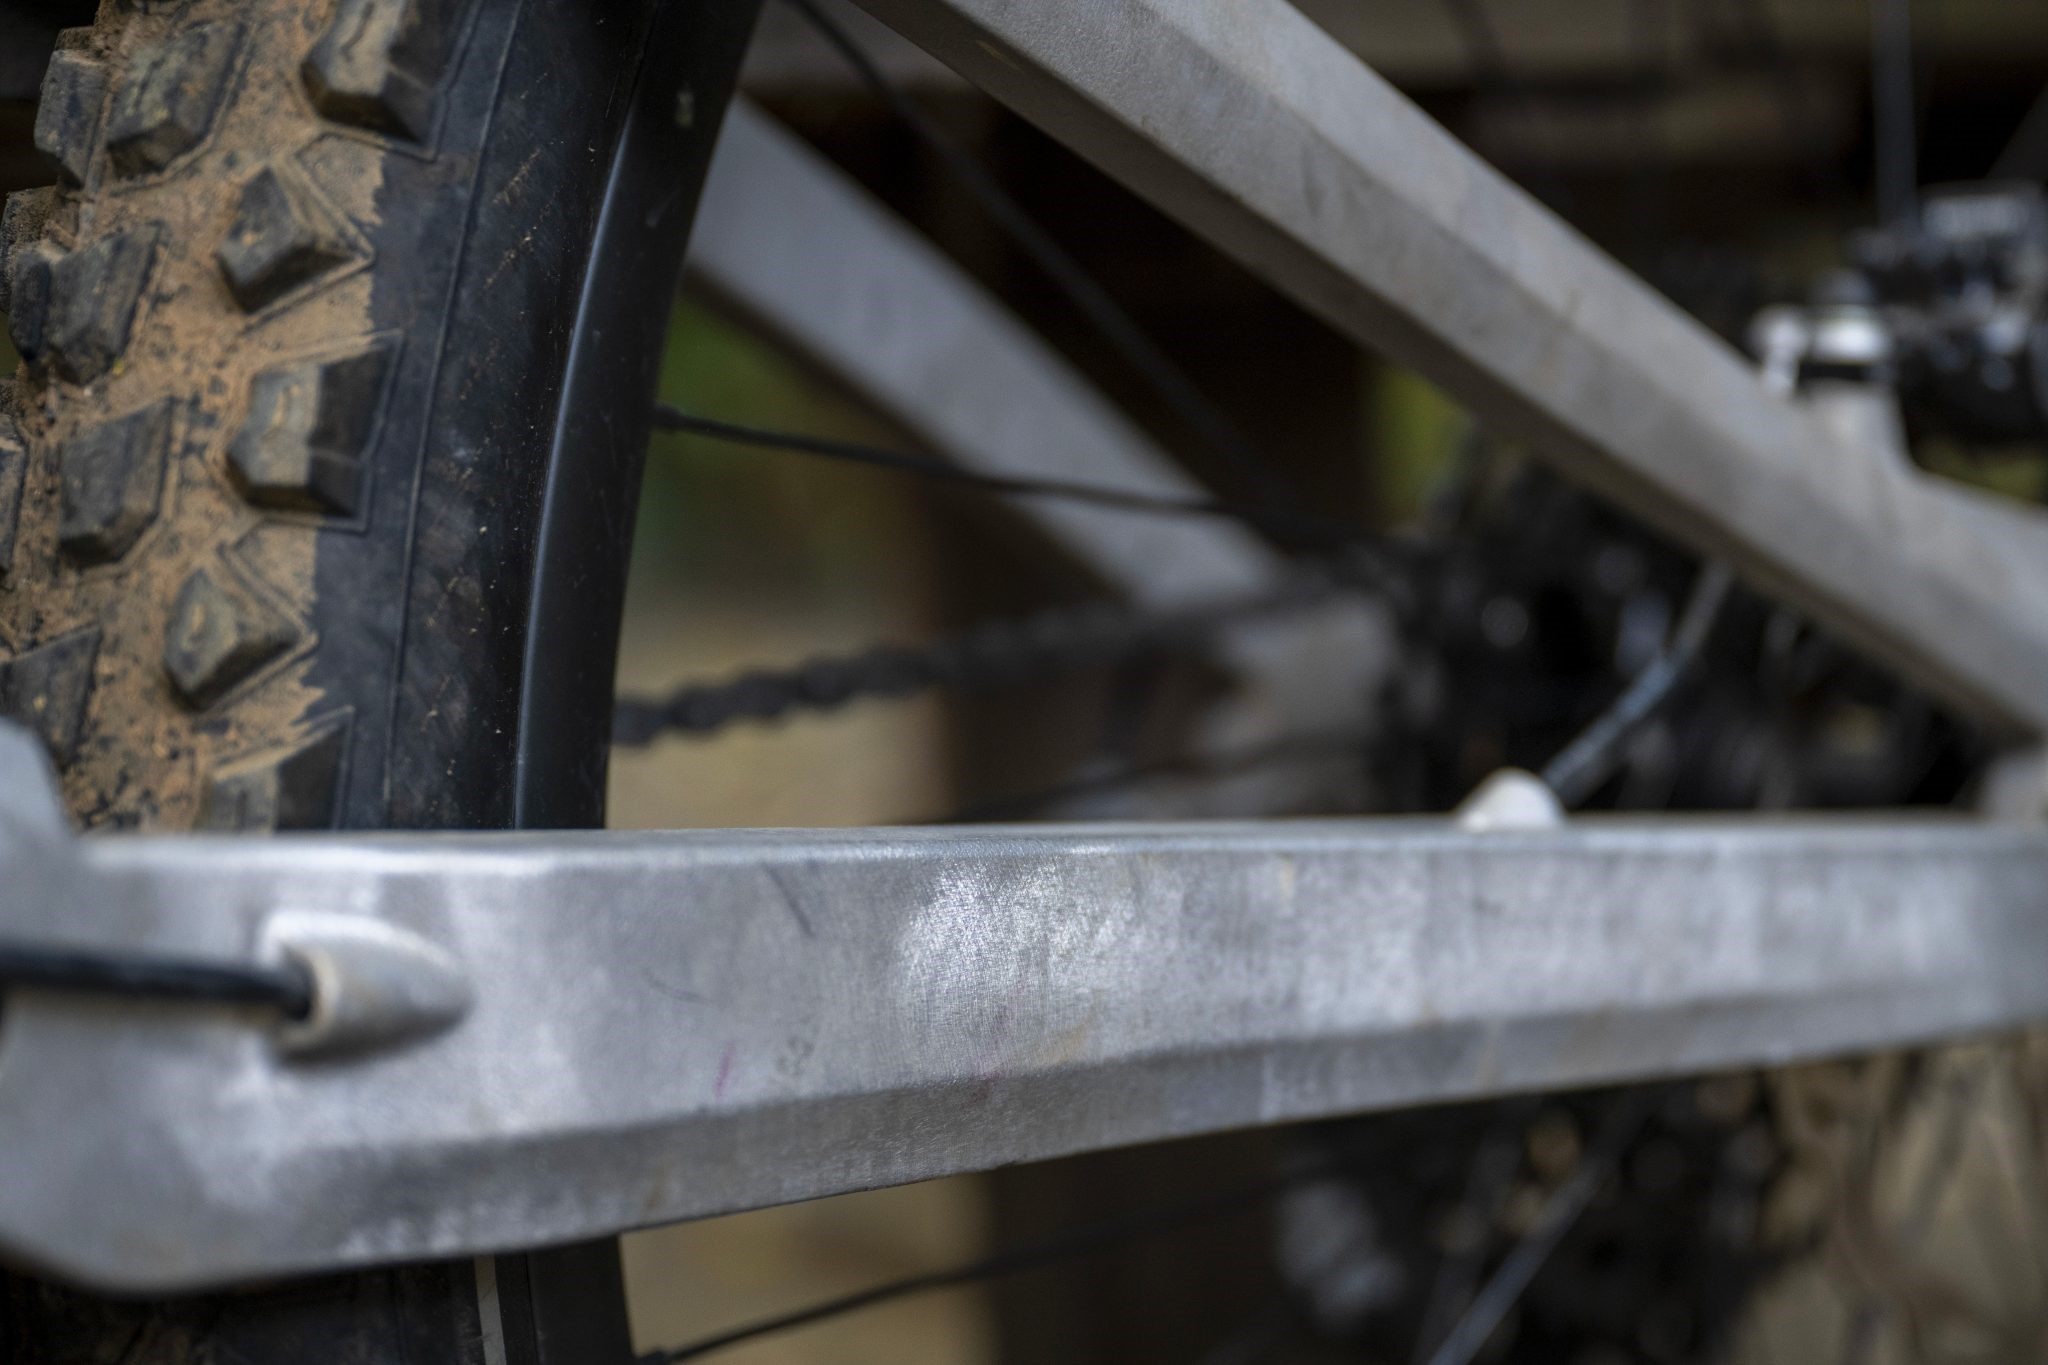 Thok Project 4 eMTB is World's First 3D-Printed Alloy Full-Suspension eBike  - Bikerumor